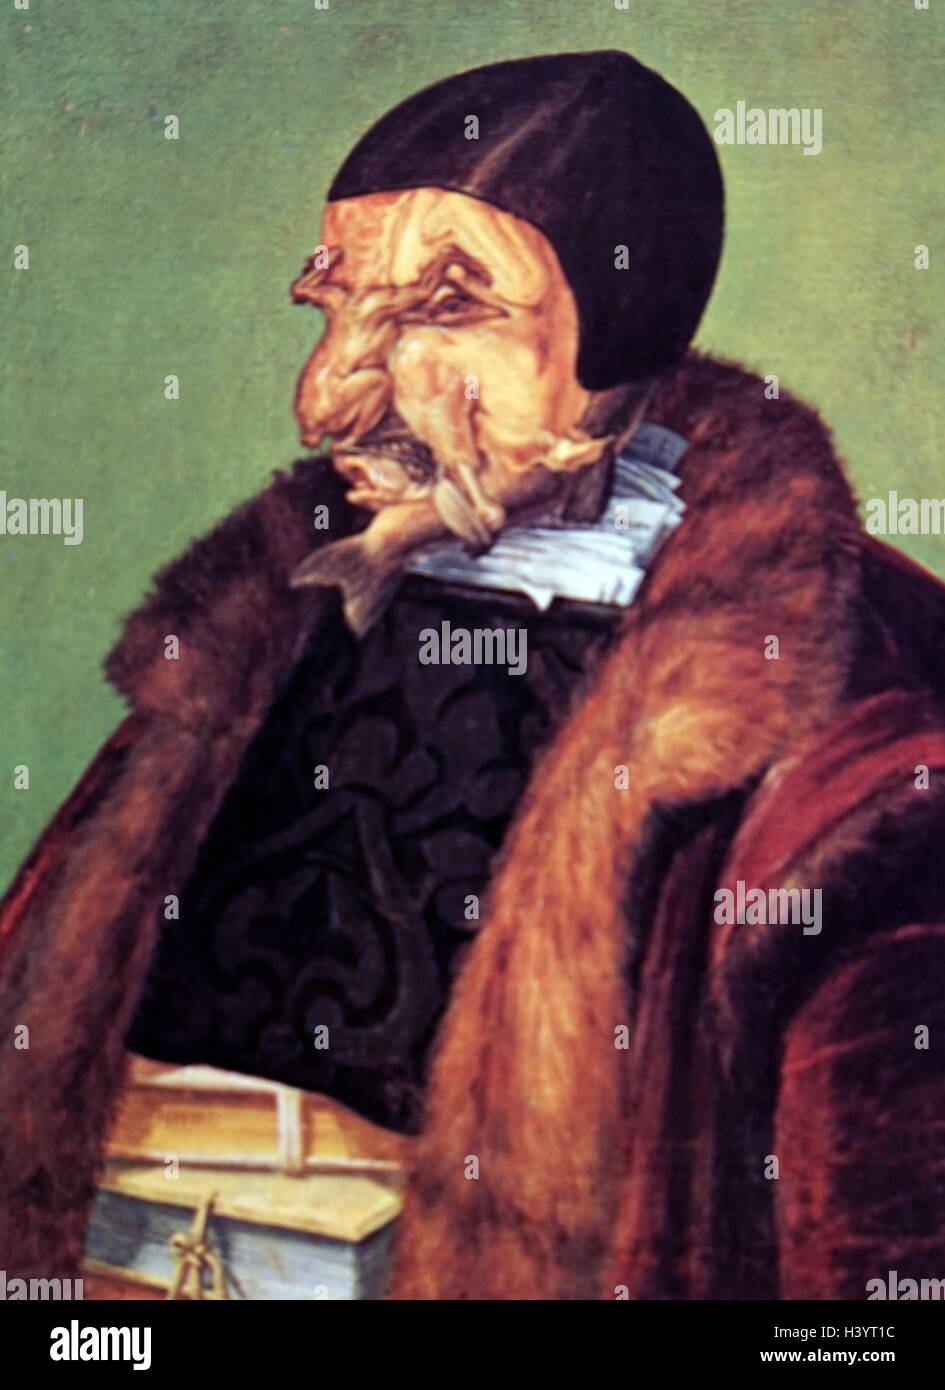 Painting titled 'The Jurist' by Giuseppe Arcimboldo (1527-1593), an Italian painter known for creating imaginative portrait heads made entirely of objects such as fruits, vegetables, flowers, fish, and books. Dated 16th Century Stock Photo